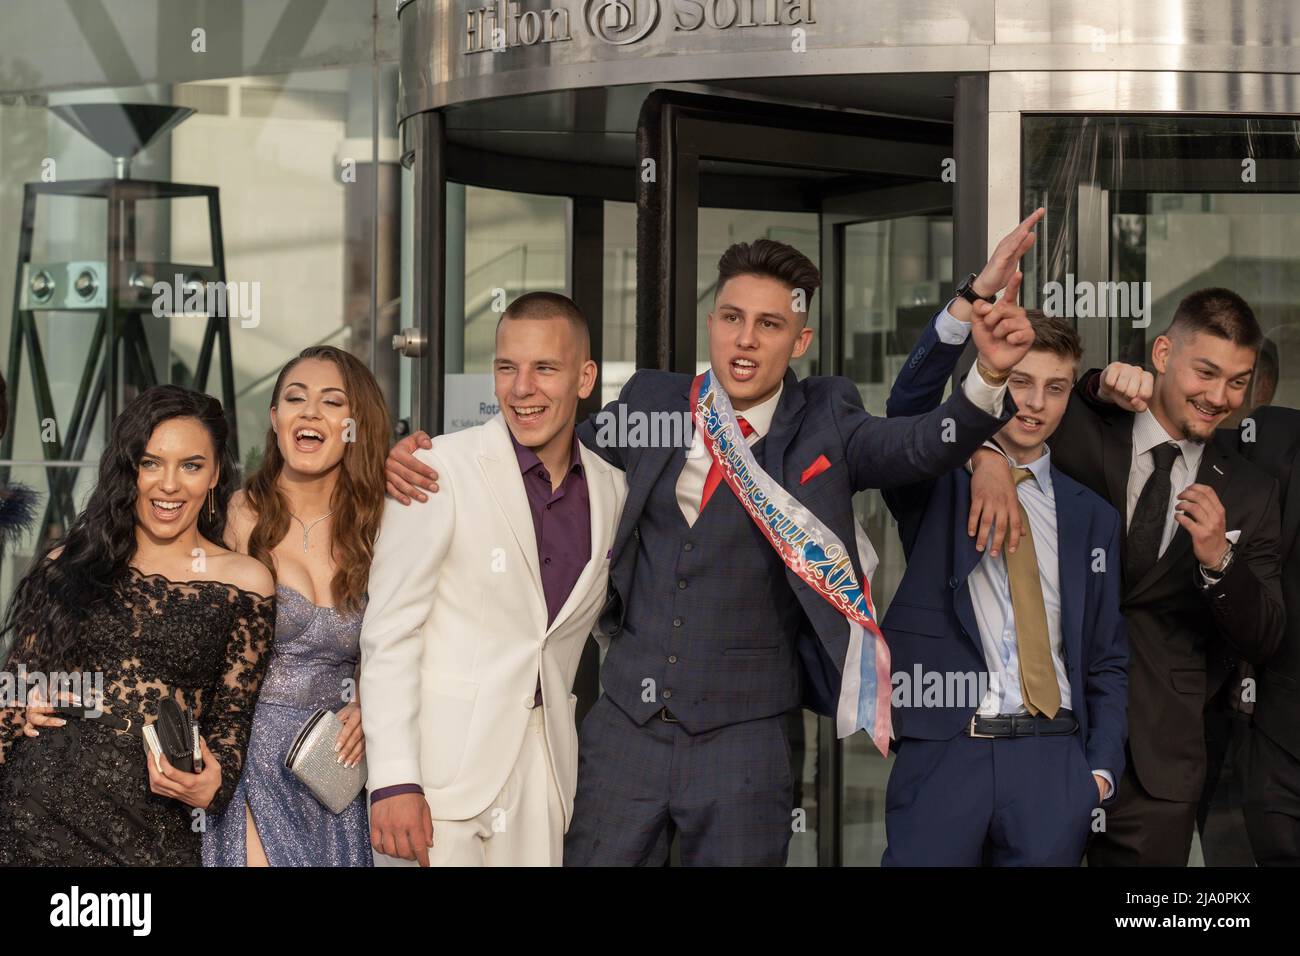 Sofia, Bulgaria - 24.05.2022, A group of students in fancy dresses enjoys emotionally the celepration of the graduate prom near the entrance of a rest Stock Photo